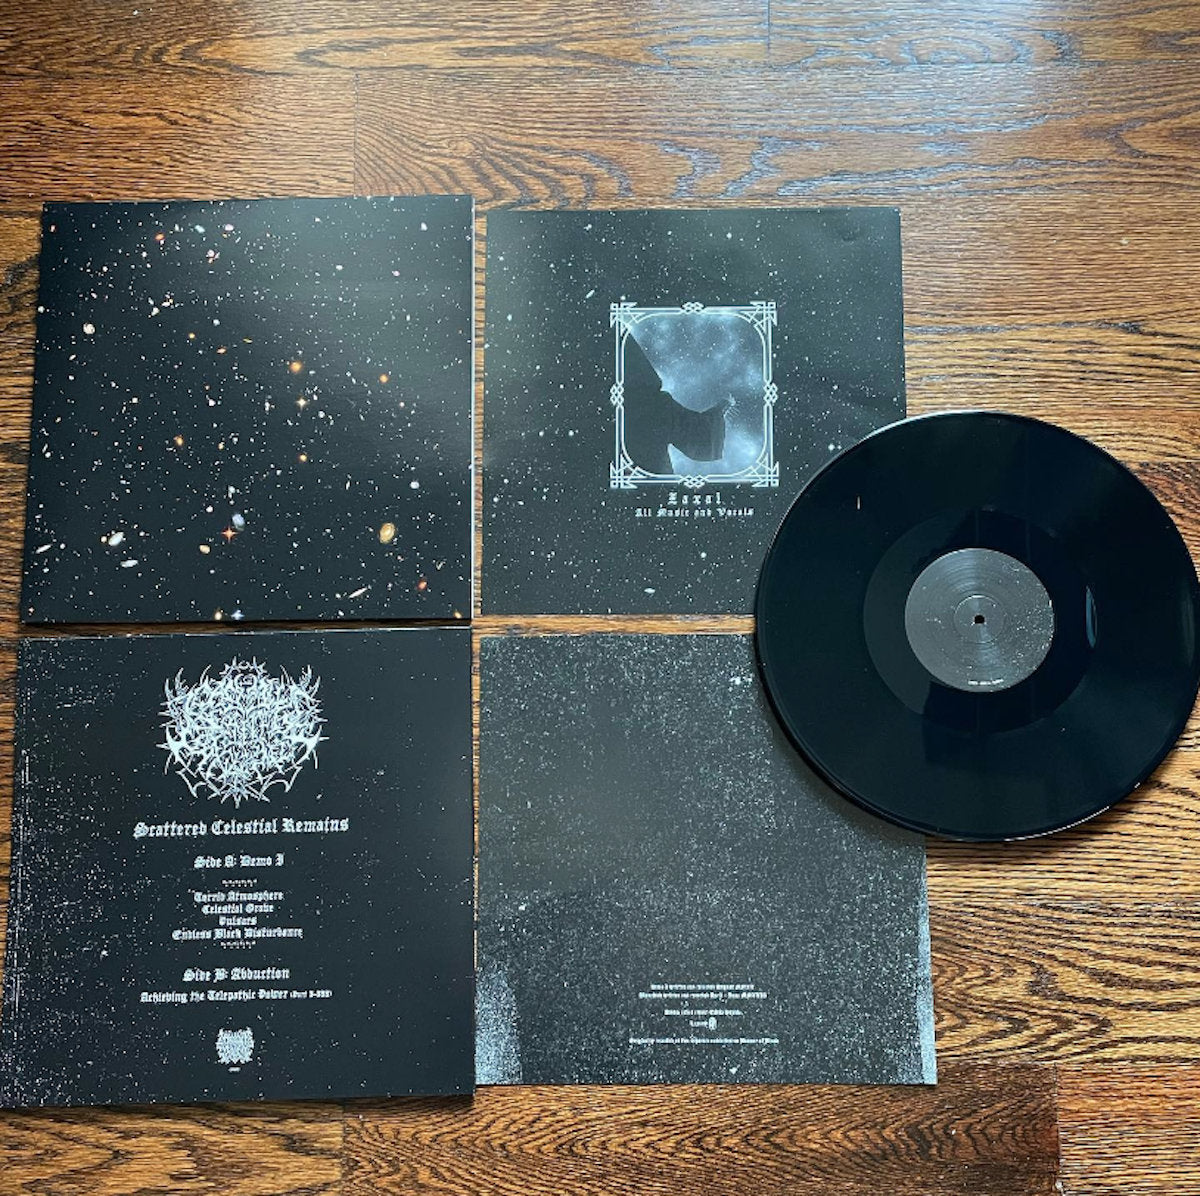 Astral Sacrifice to Ganymede (US) "Scattered Celestial Remains" - 12" LP